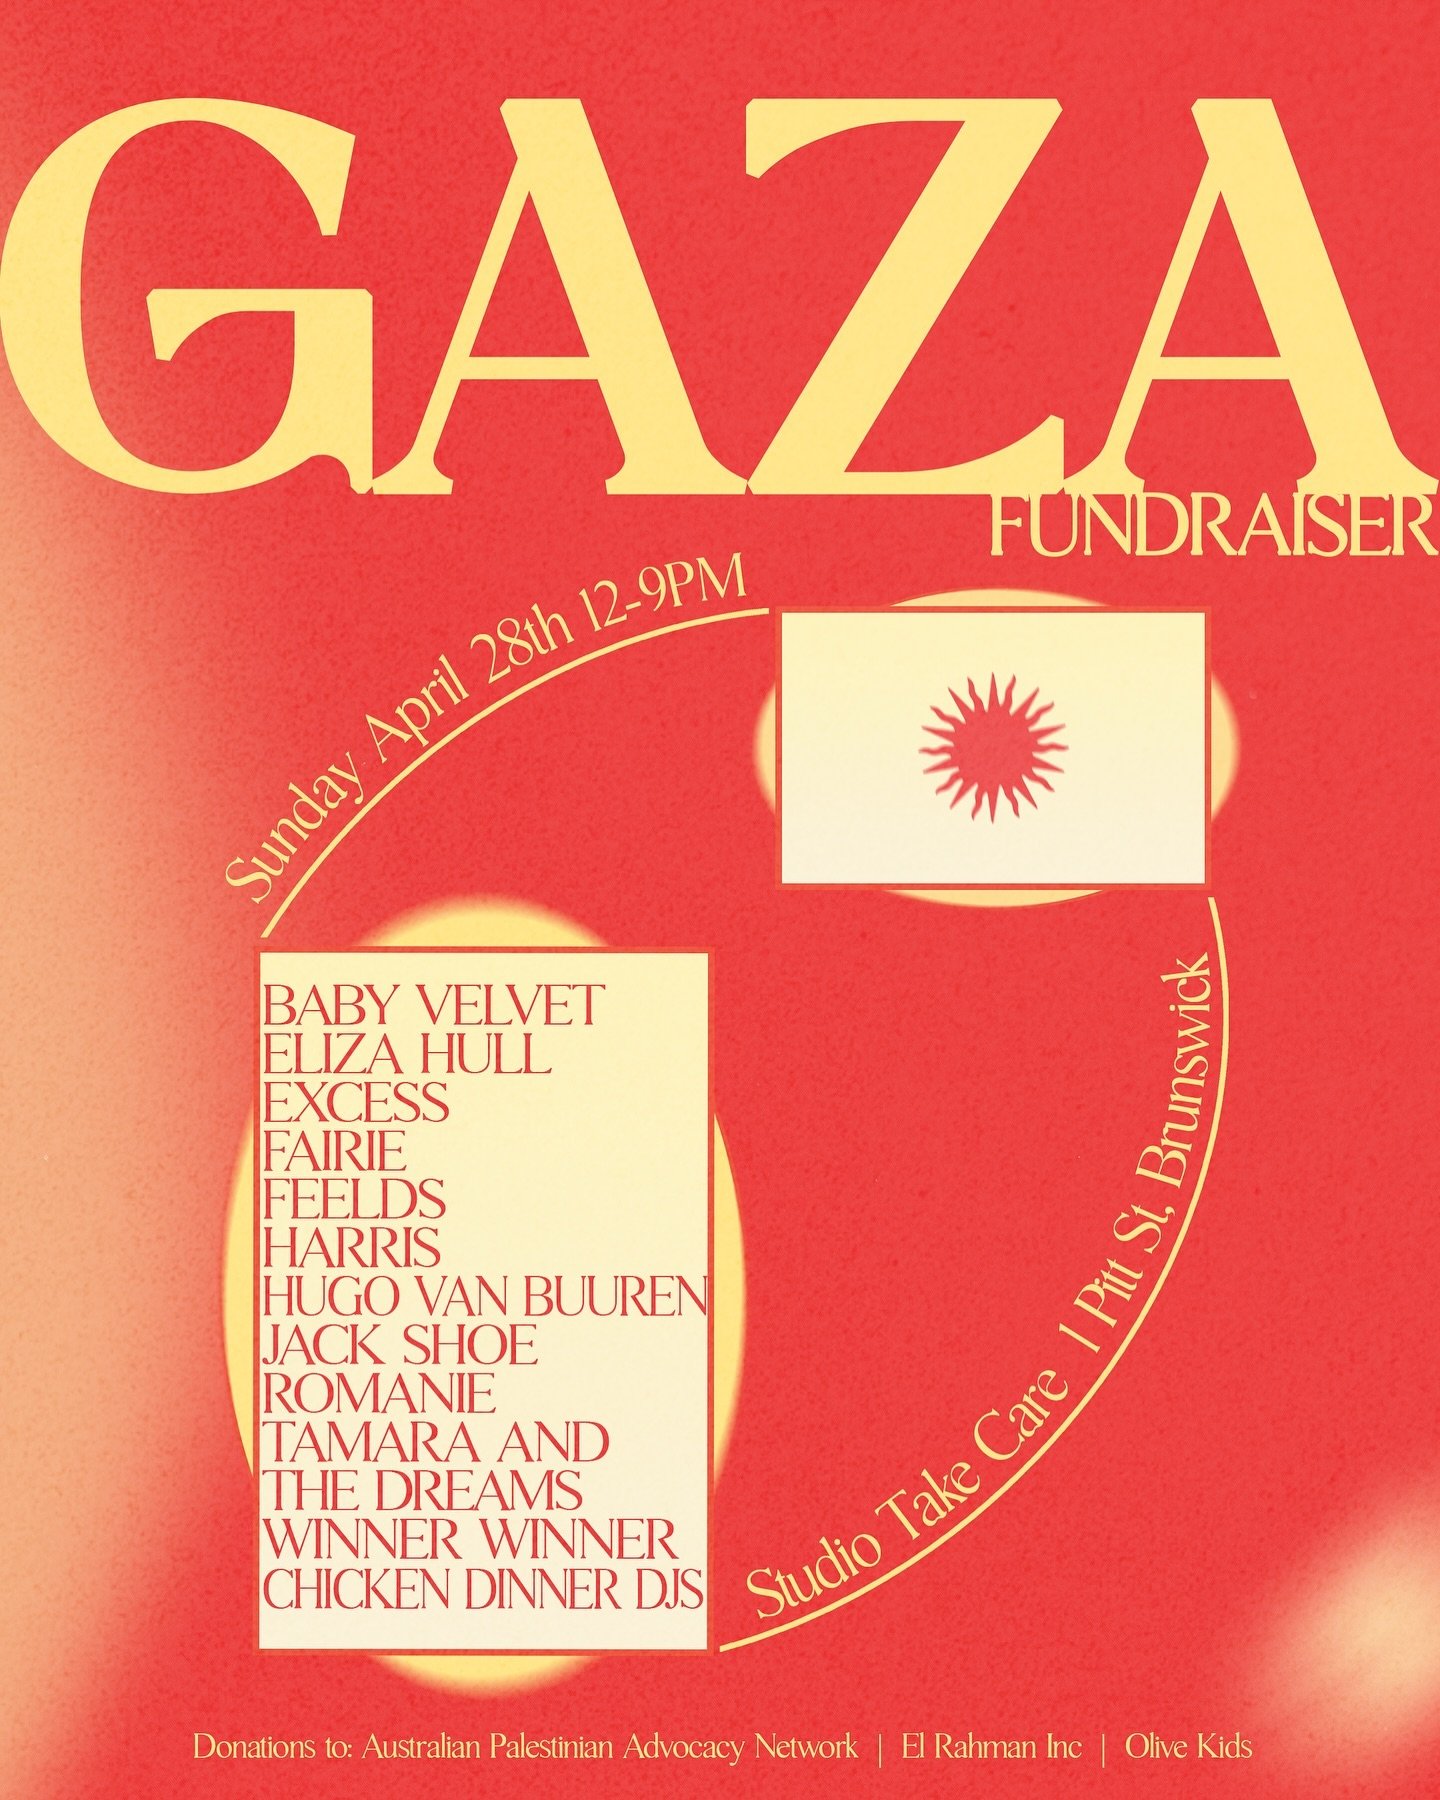 THIS WEEKEND! $20. This Gaza Fundraiser is a collaboration of Naarm/Melbourne creative community, standing in solidarity with Gaza.&nbsp;

It&rsquo;s going to be a really special day with some incredible musicians + DJs playing in our chapel, here at